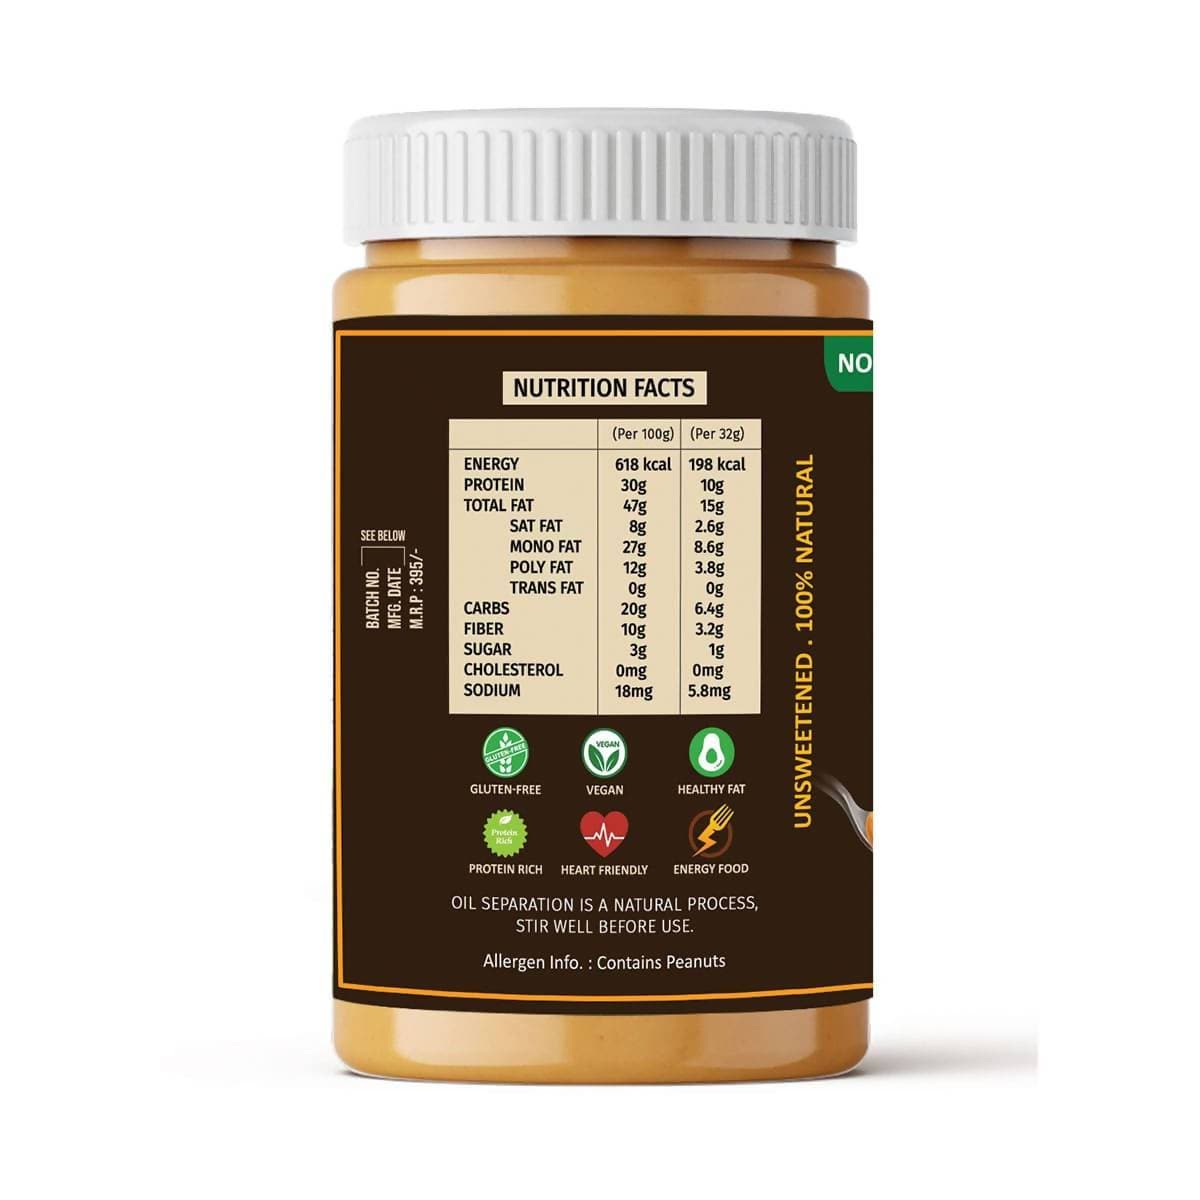 Oye Healthy! Peanut Butter Natural Creamy - Combo Pack of 2 ( 850gm + 340gm )